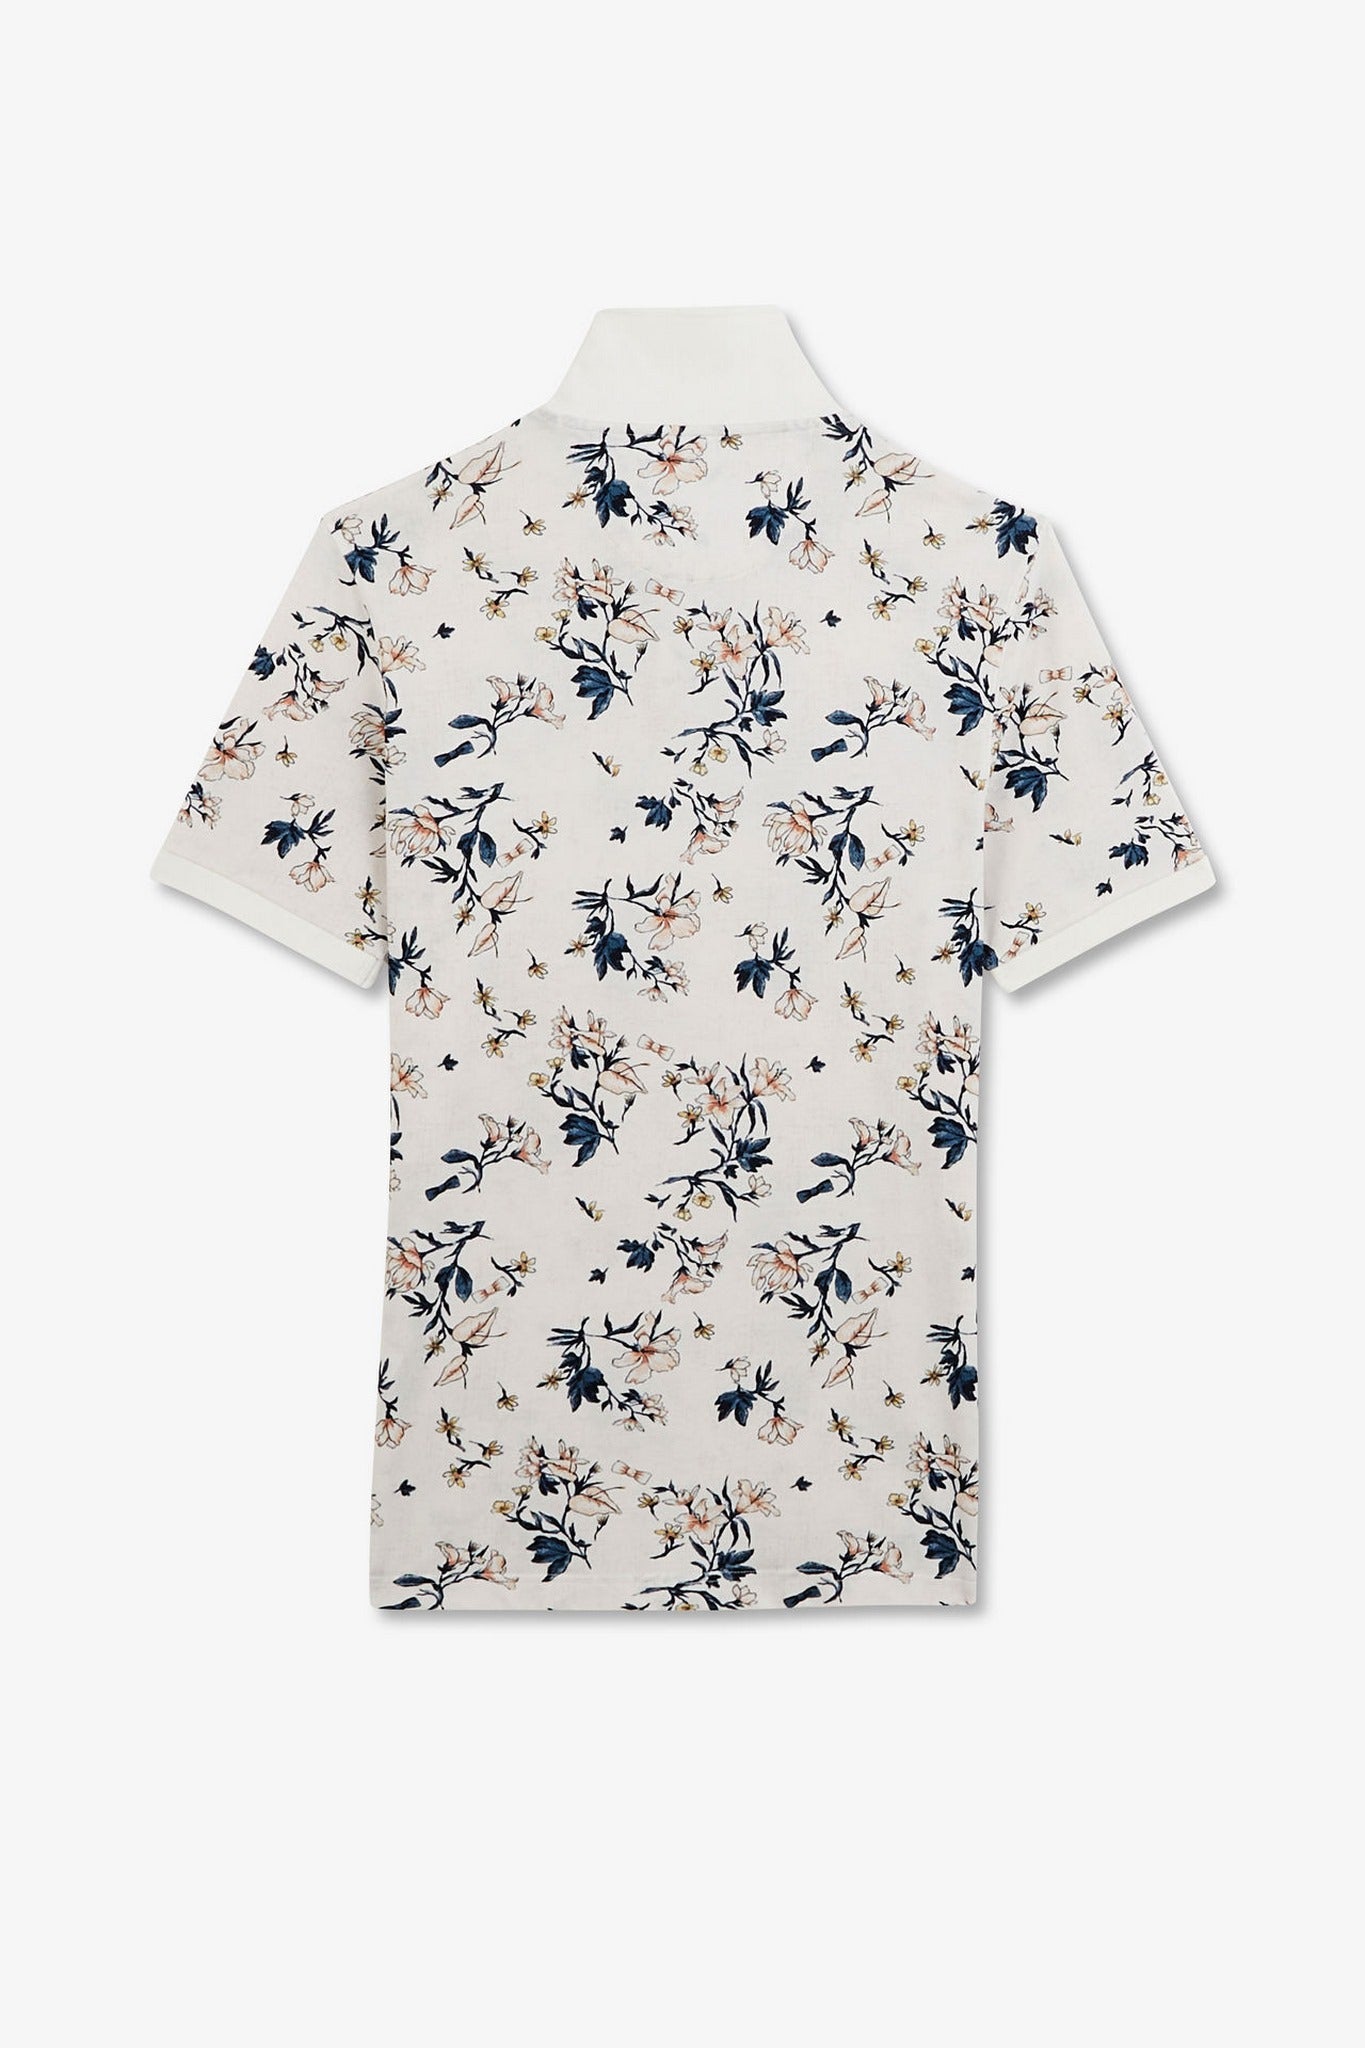 White polo shirt with an exclusive floral print - Image 5